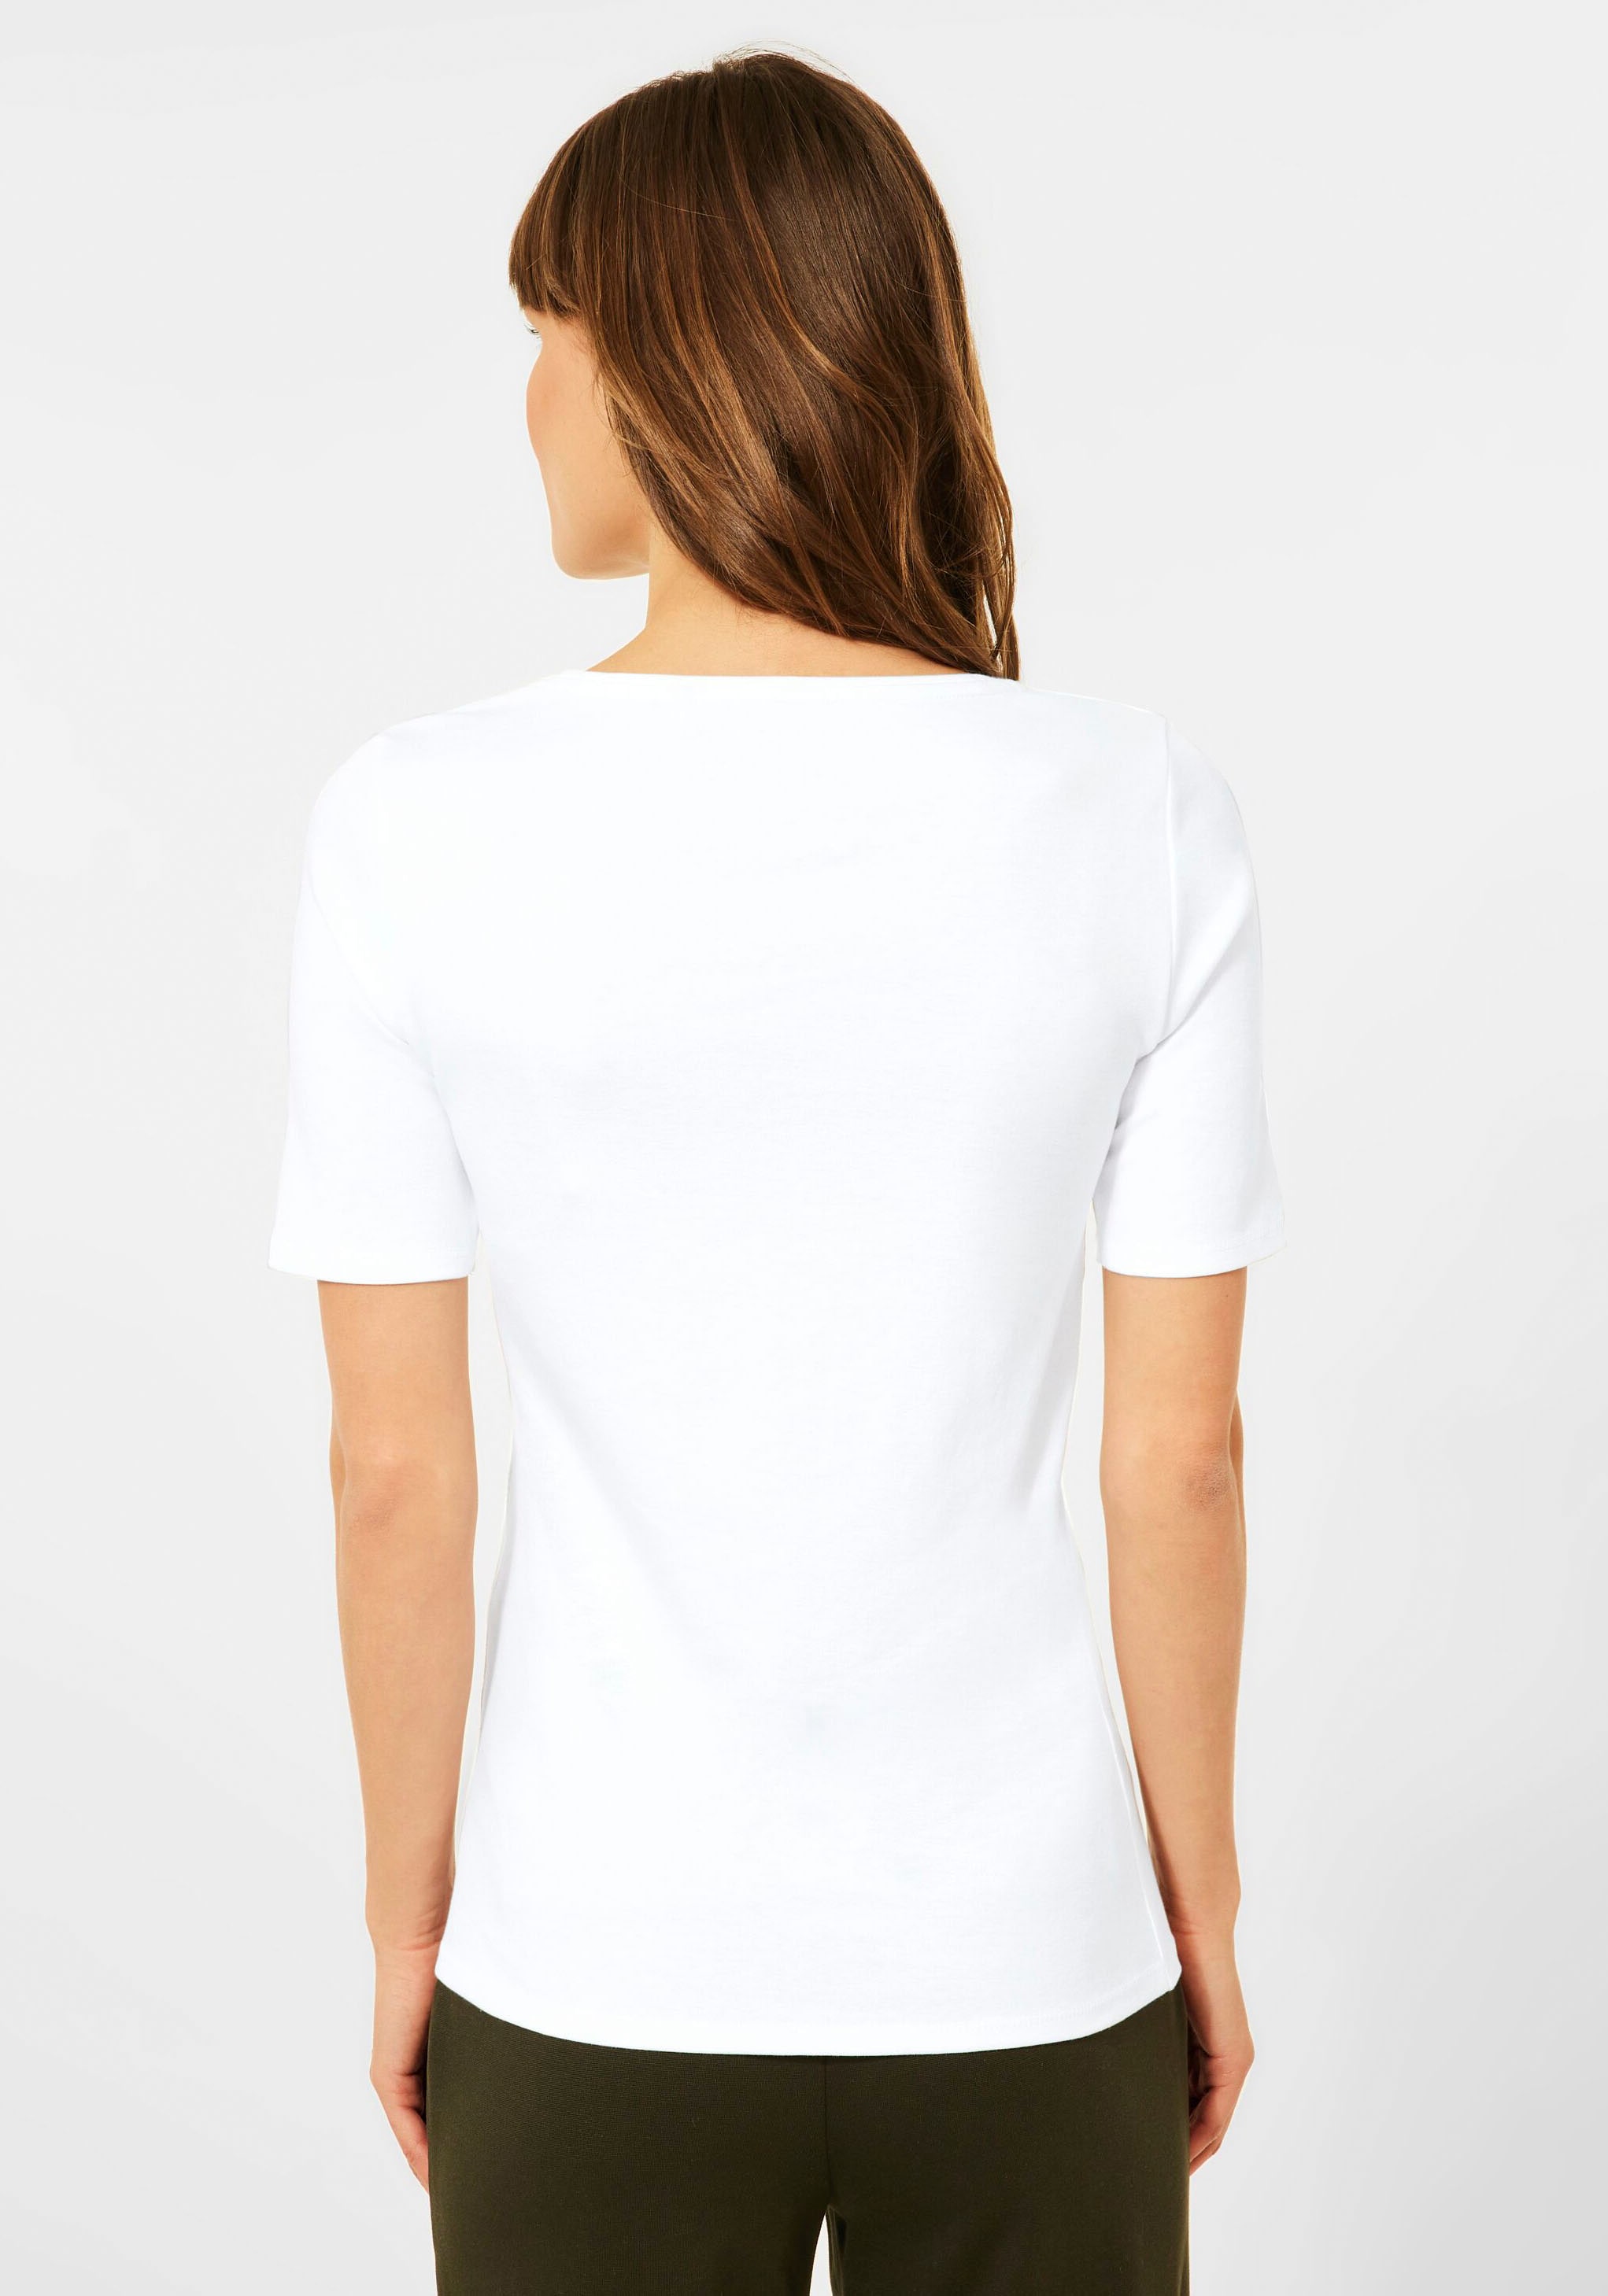 ♕ Lena«, in Unifarbe T-Shirt bei Cecil »Style